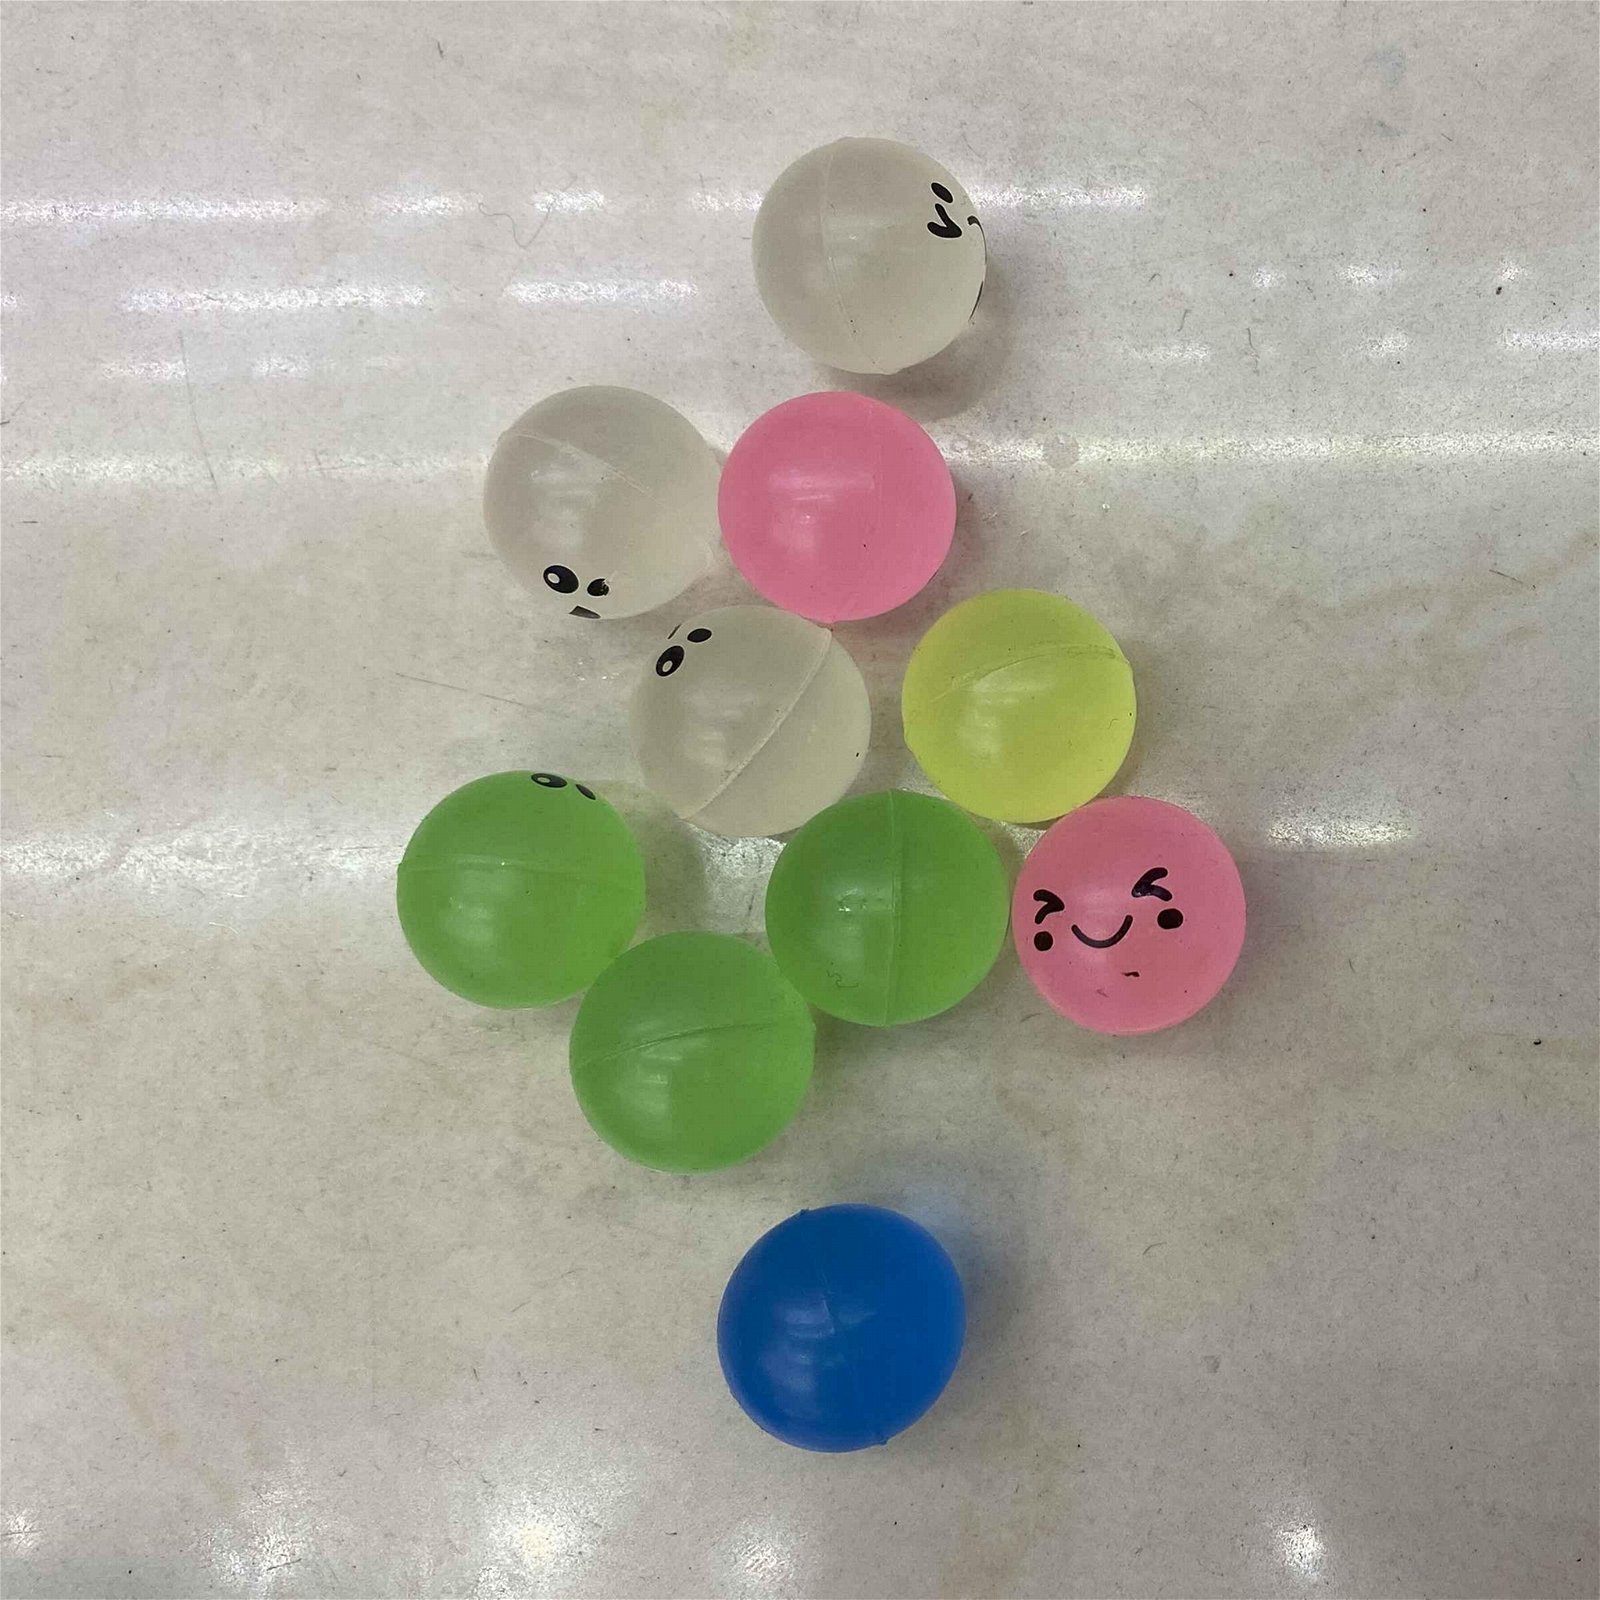 32mm transparent high bouncing balls with emoji painting 2